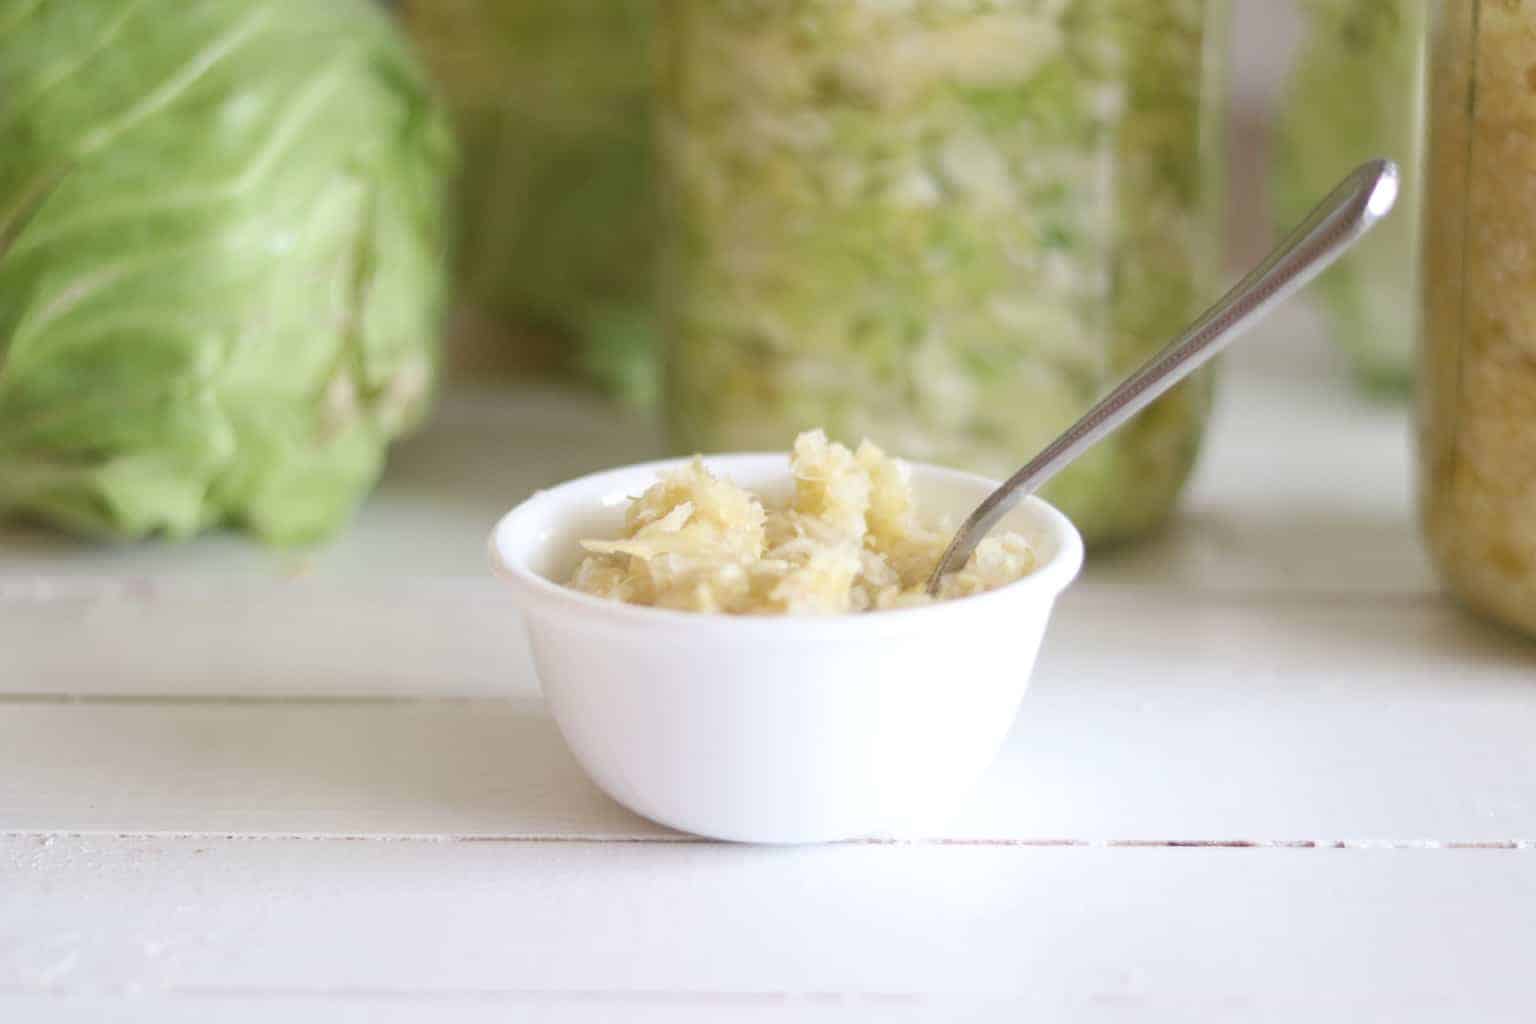 Small white bowl of sauerkraut with cabbage in background.